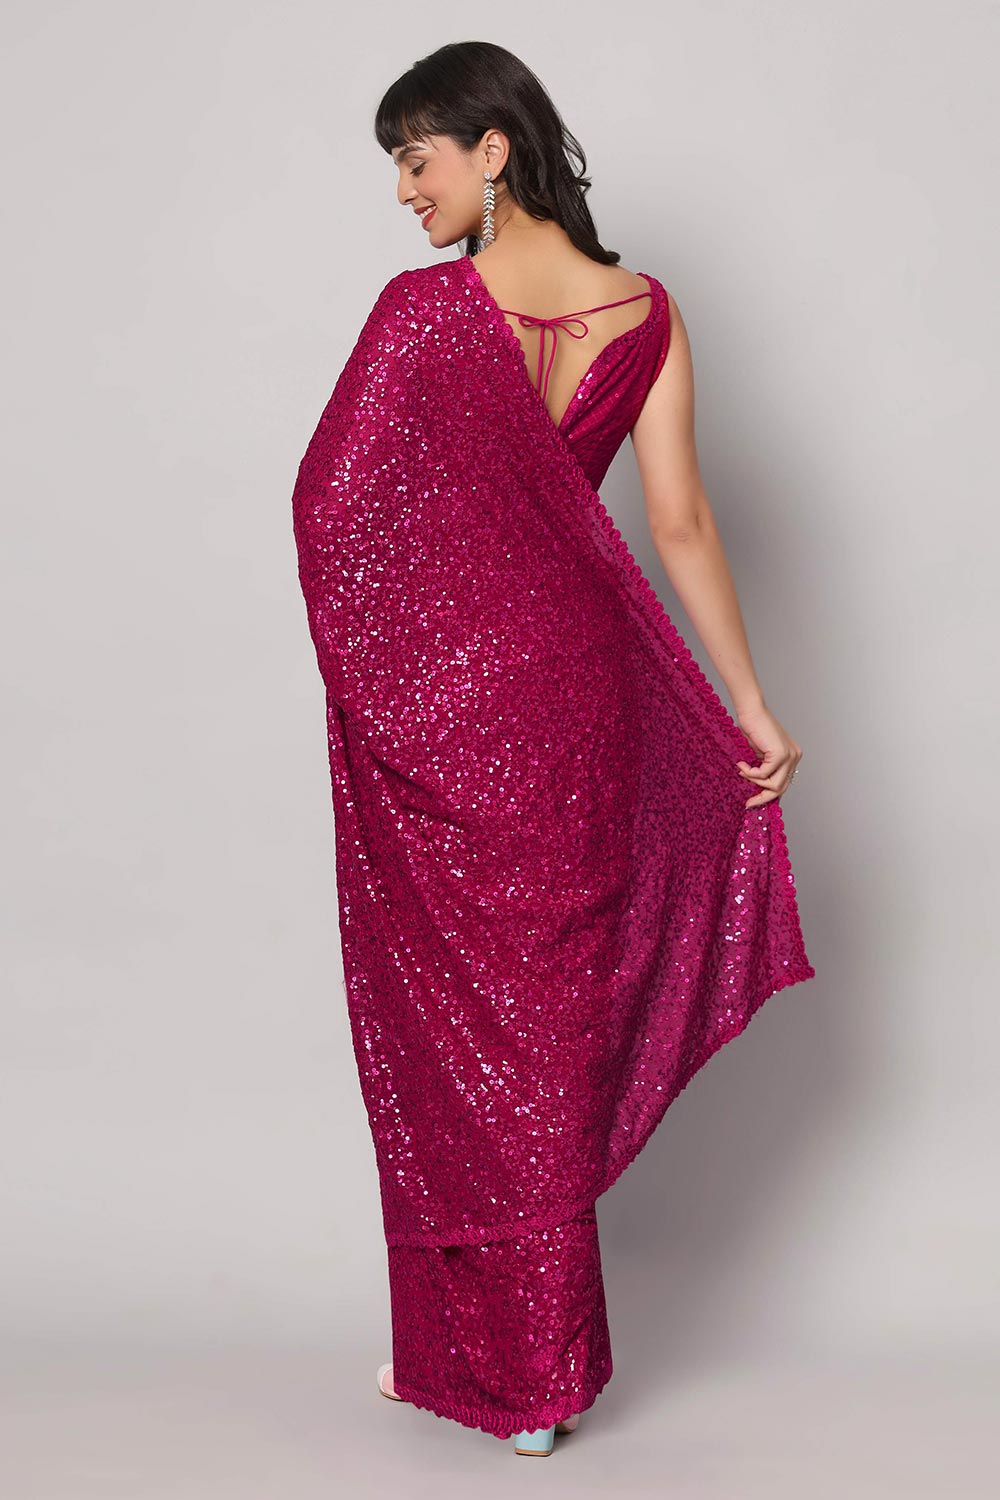 Shop Tasha Pink Sequins Embroidery Faux Georgette One Minute Saree at best offer at our  Store - One Minute Saree